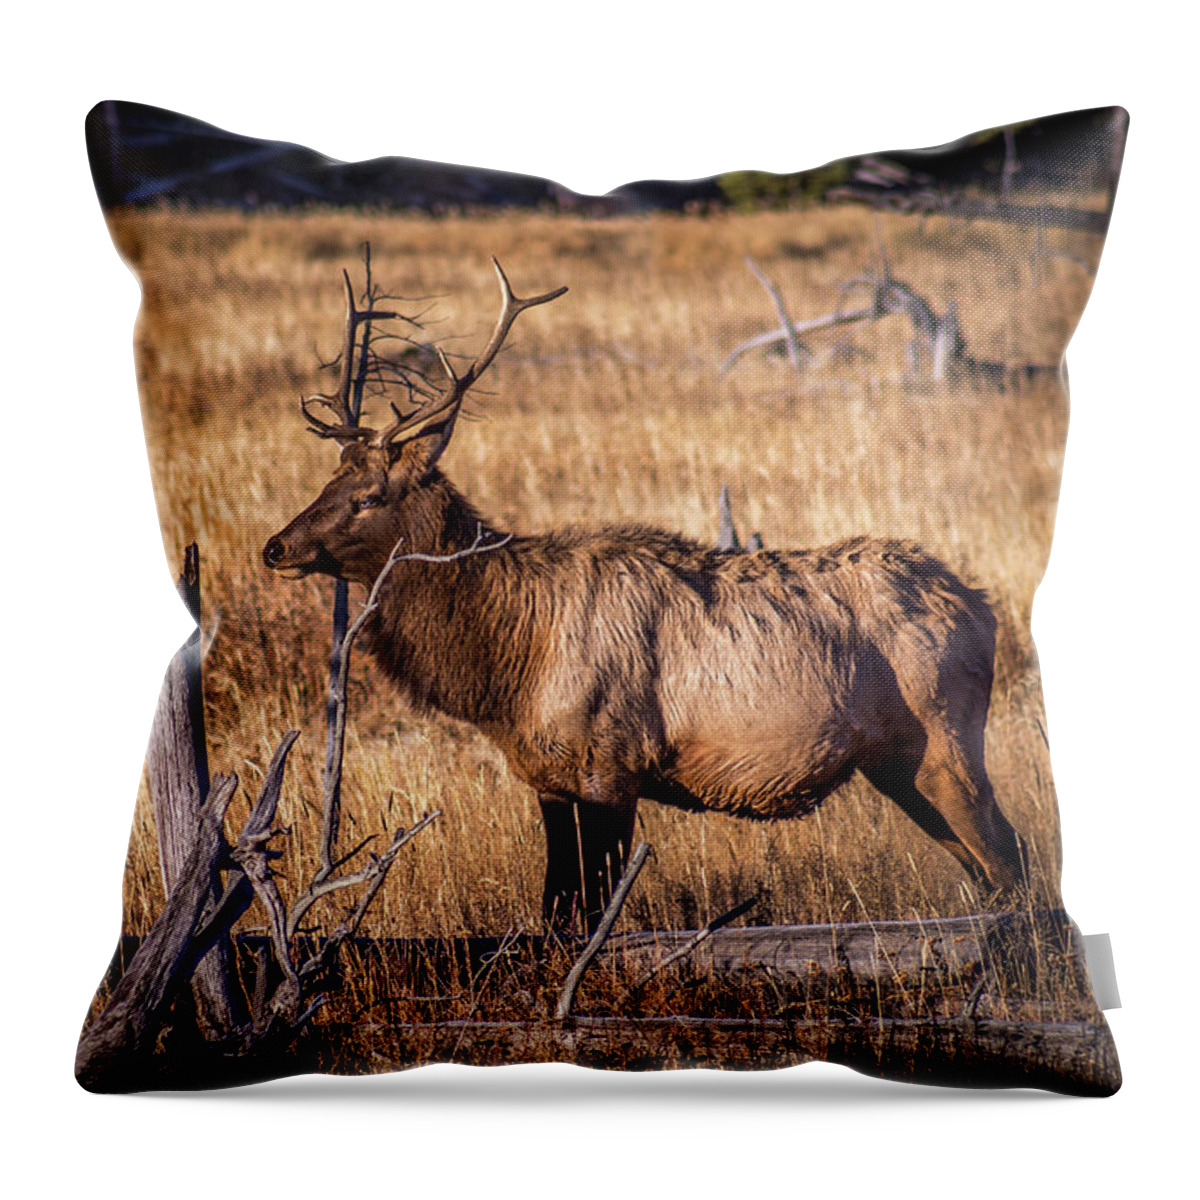 Elk Throw Pillow featuring the photograph Yellowstone Bull Elk by Jen Manganello